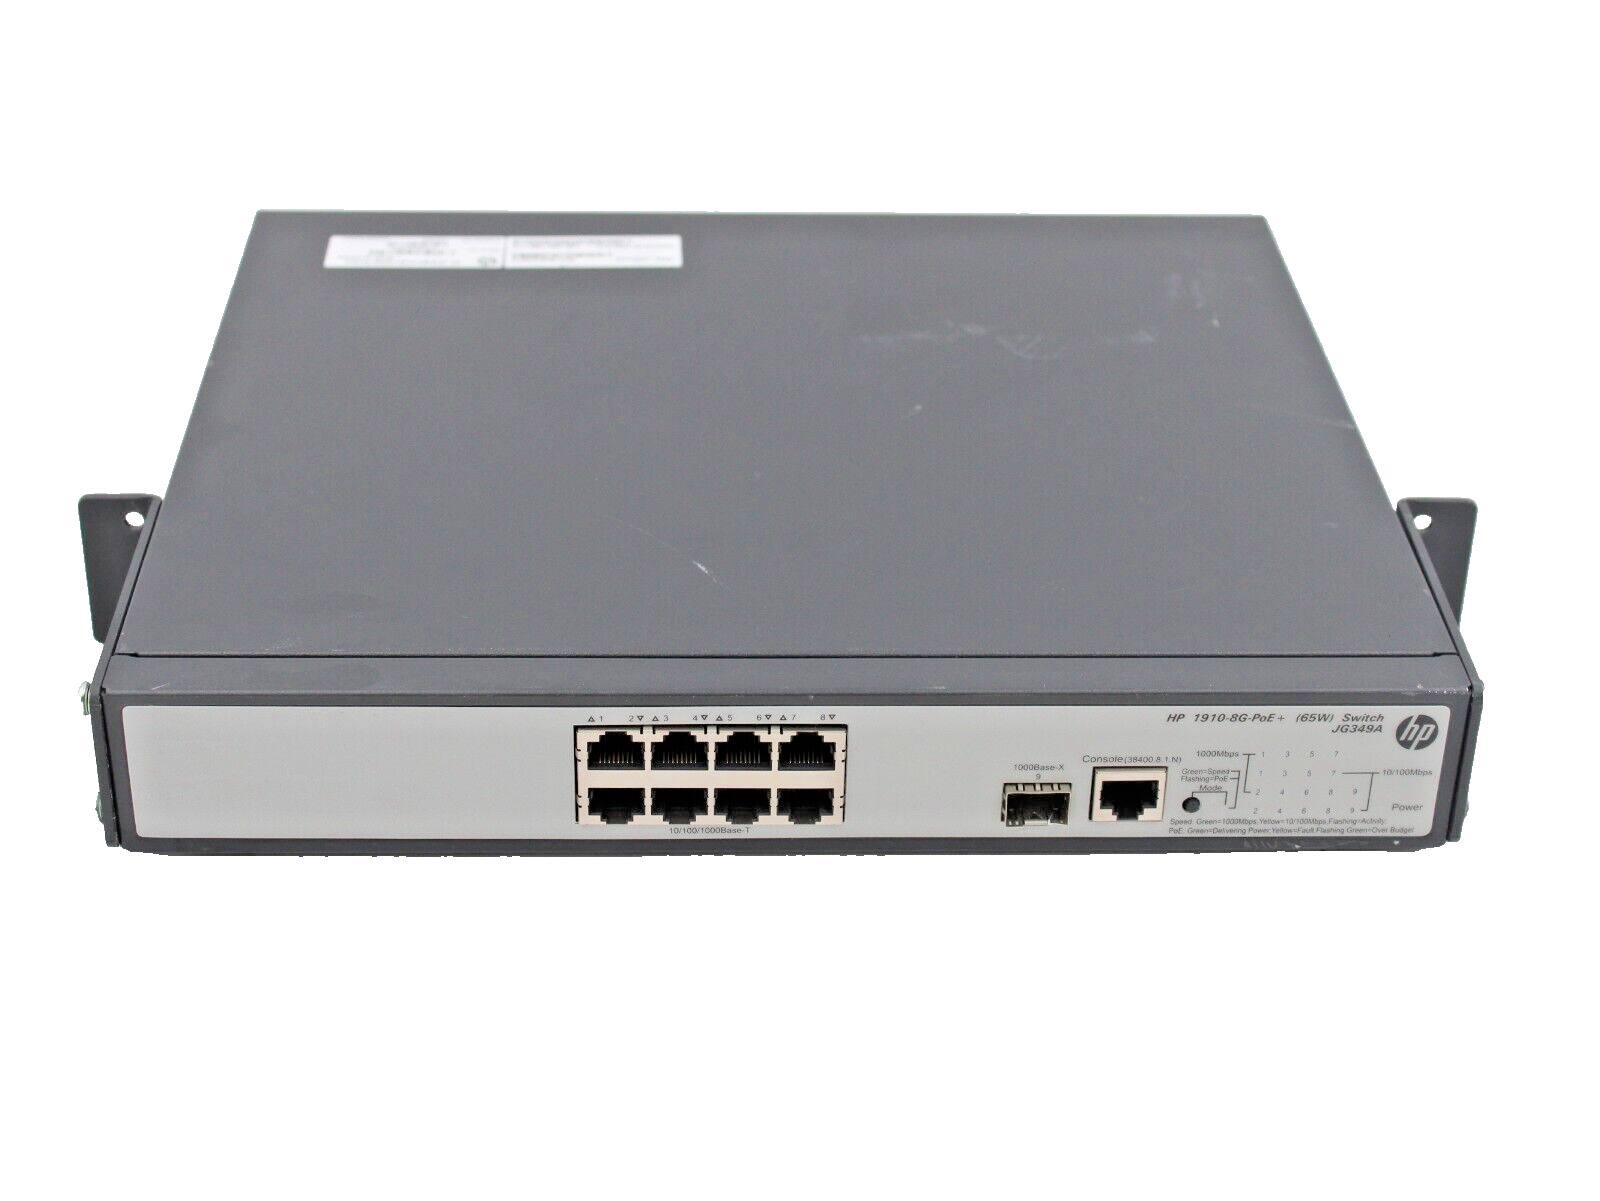 HP 1910 8G-POE+ JG349A 8 Port Switch w/Power Over Ethernet - Tested